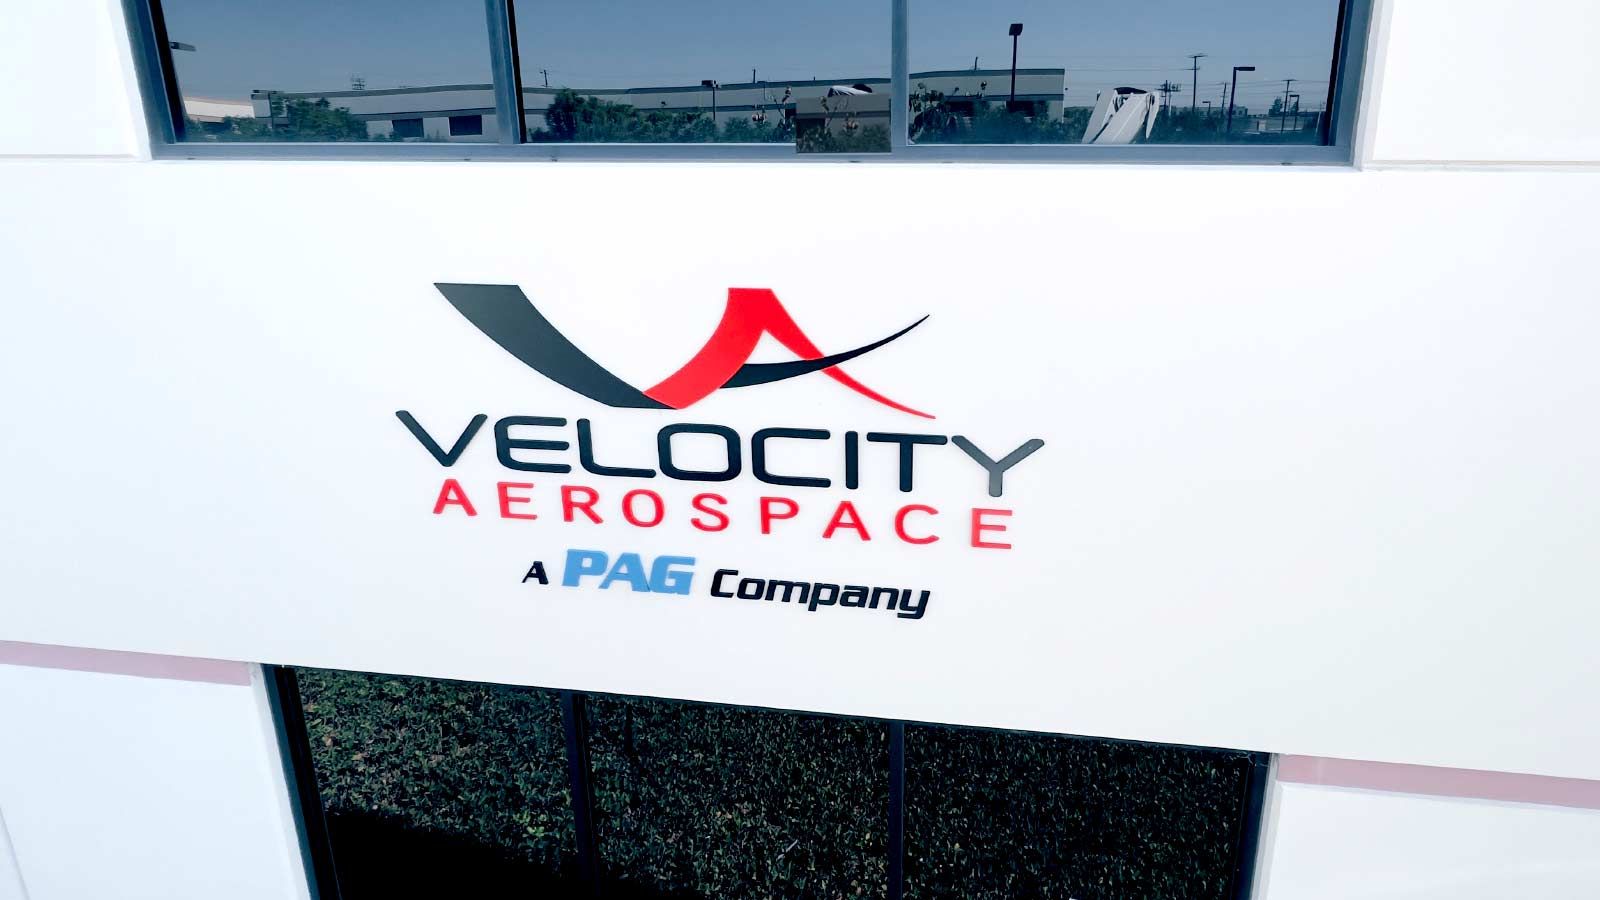 Velocity Aerospace building sign attached to the facade